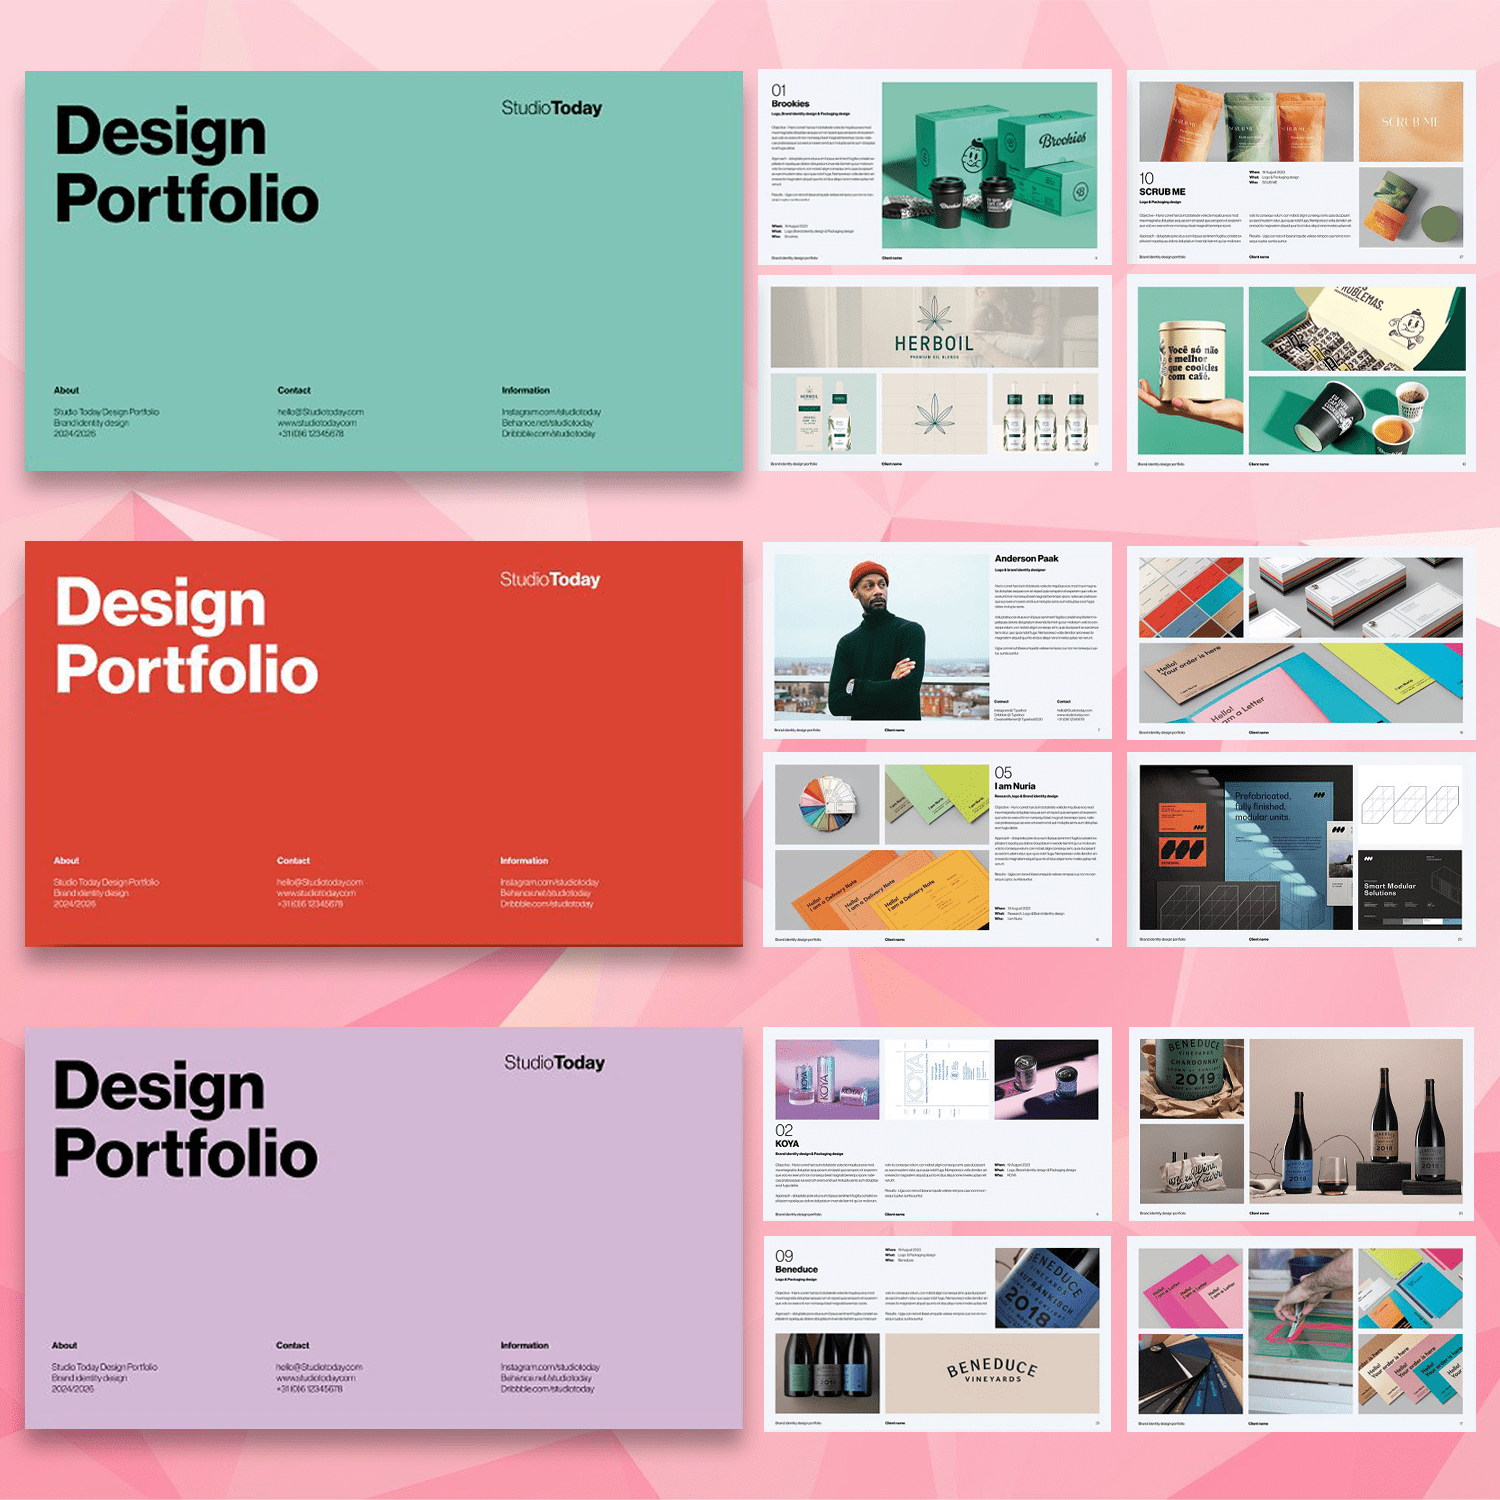 With this Design Portfolio Template you can present your creative company to your customers.